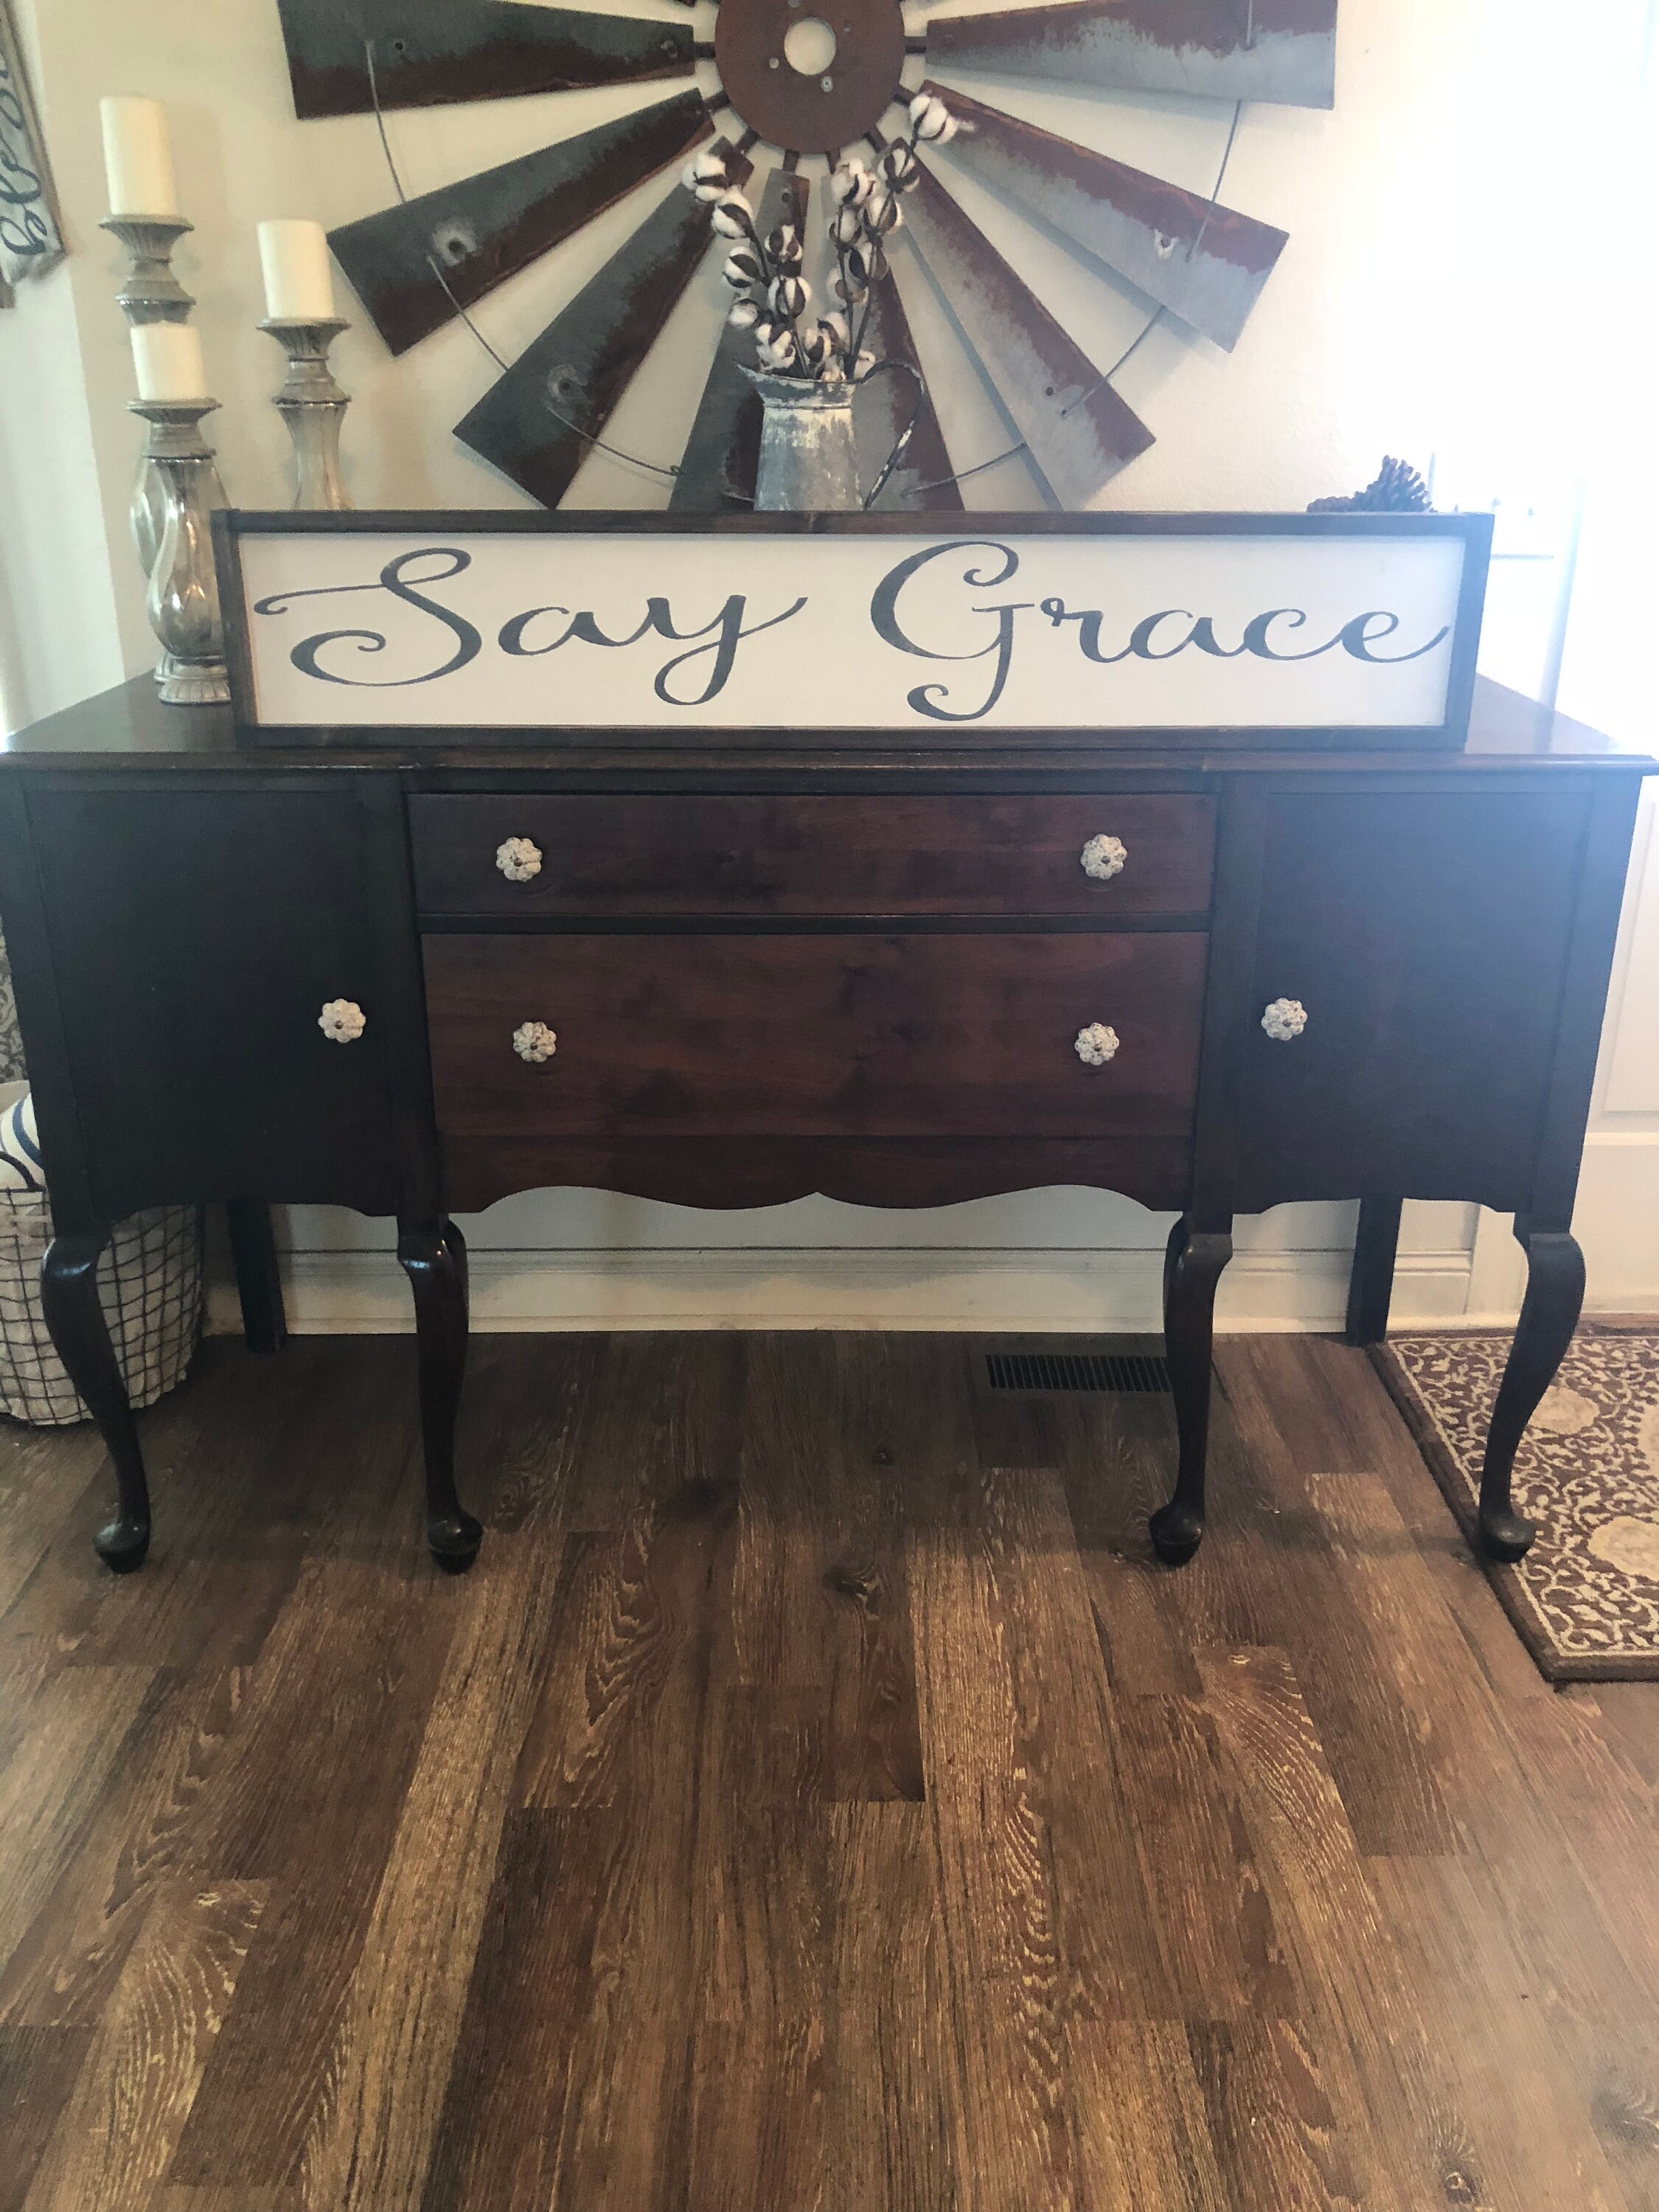 Say Grace Sign / Large Sign / Hand Painted Sign / Dining Room - Etsy